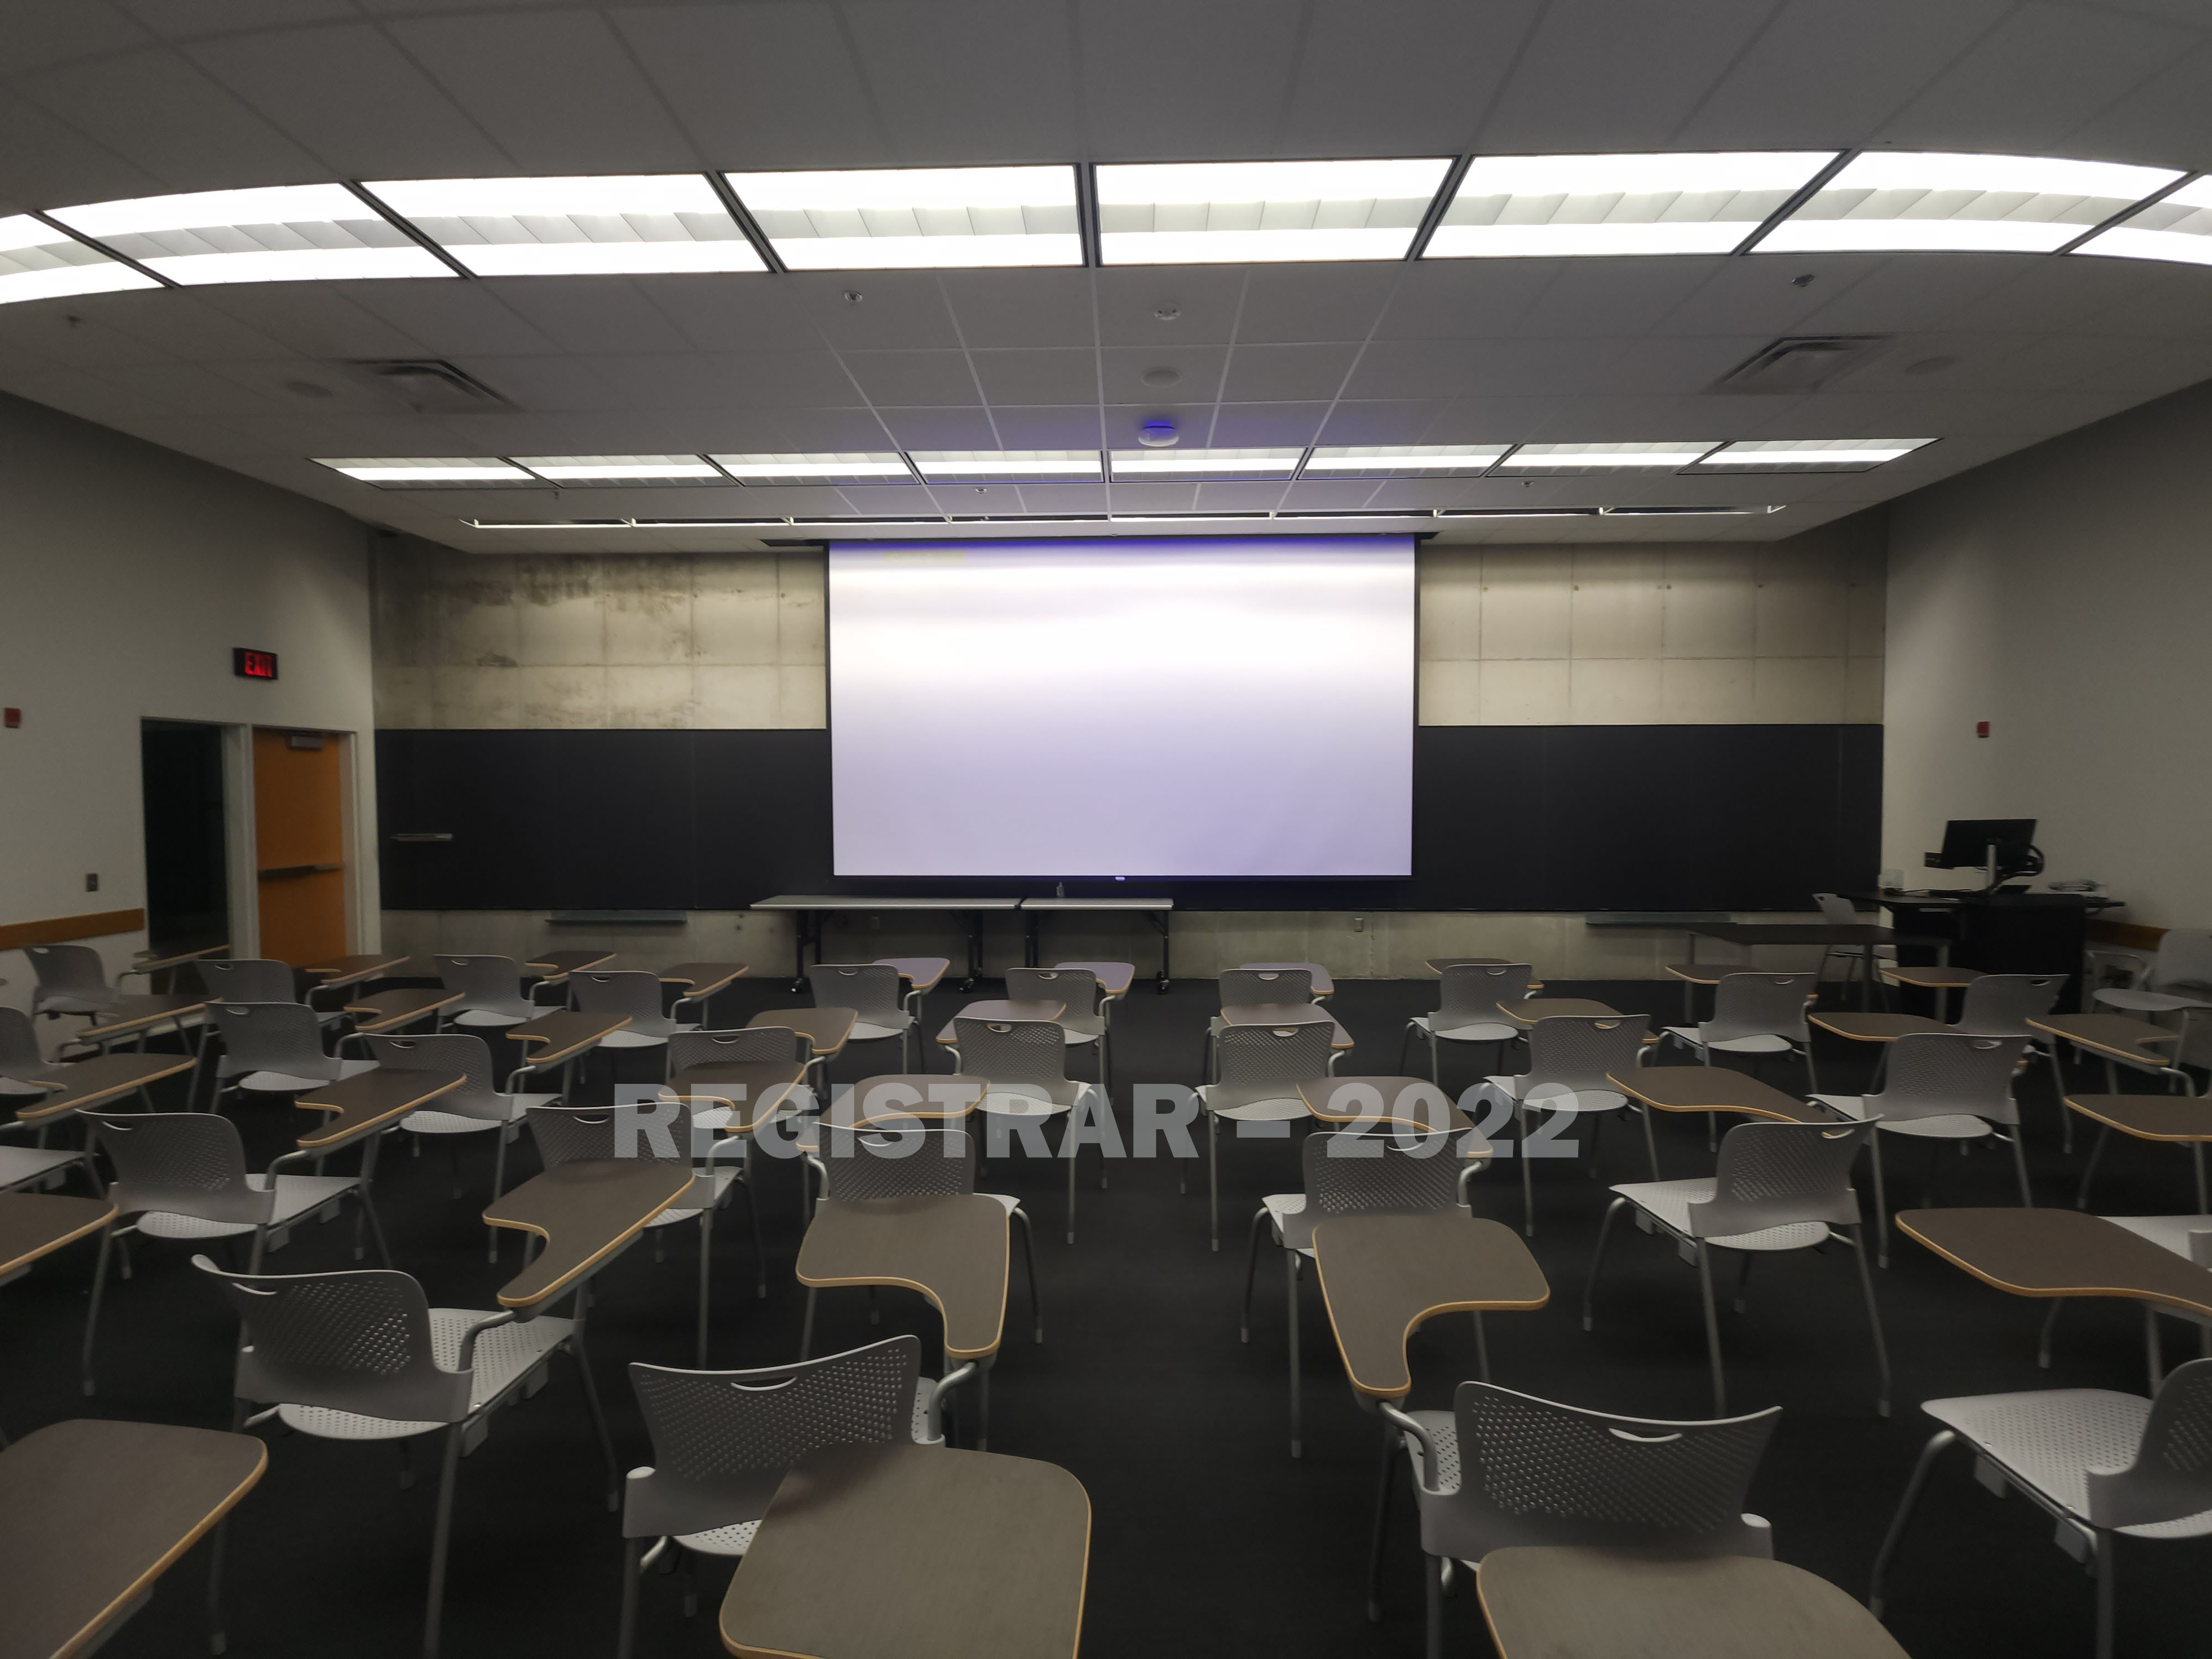 Knowlton Hall room 190 ultra wide angle view from the back of the room with projector screen down